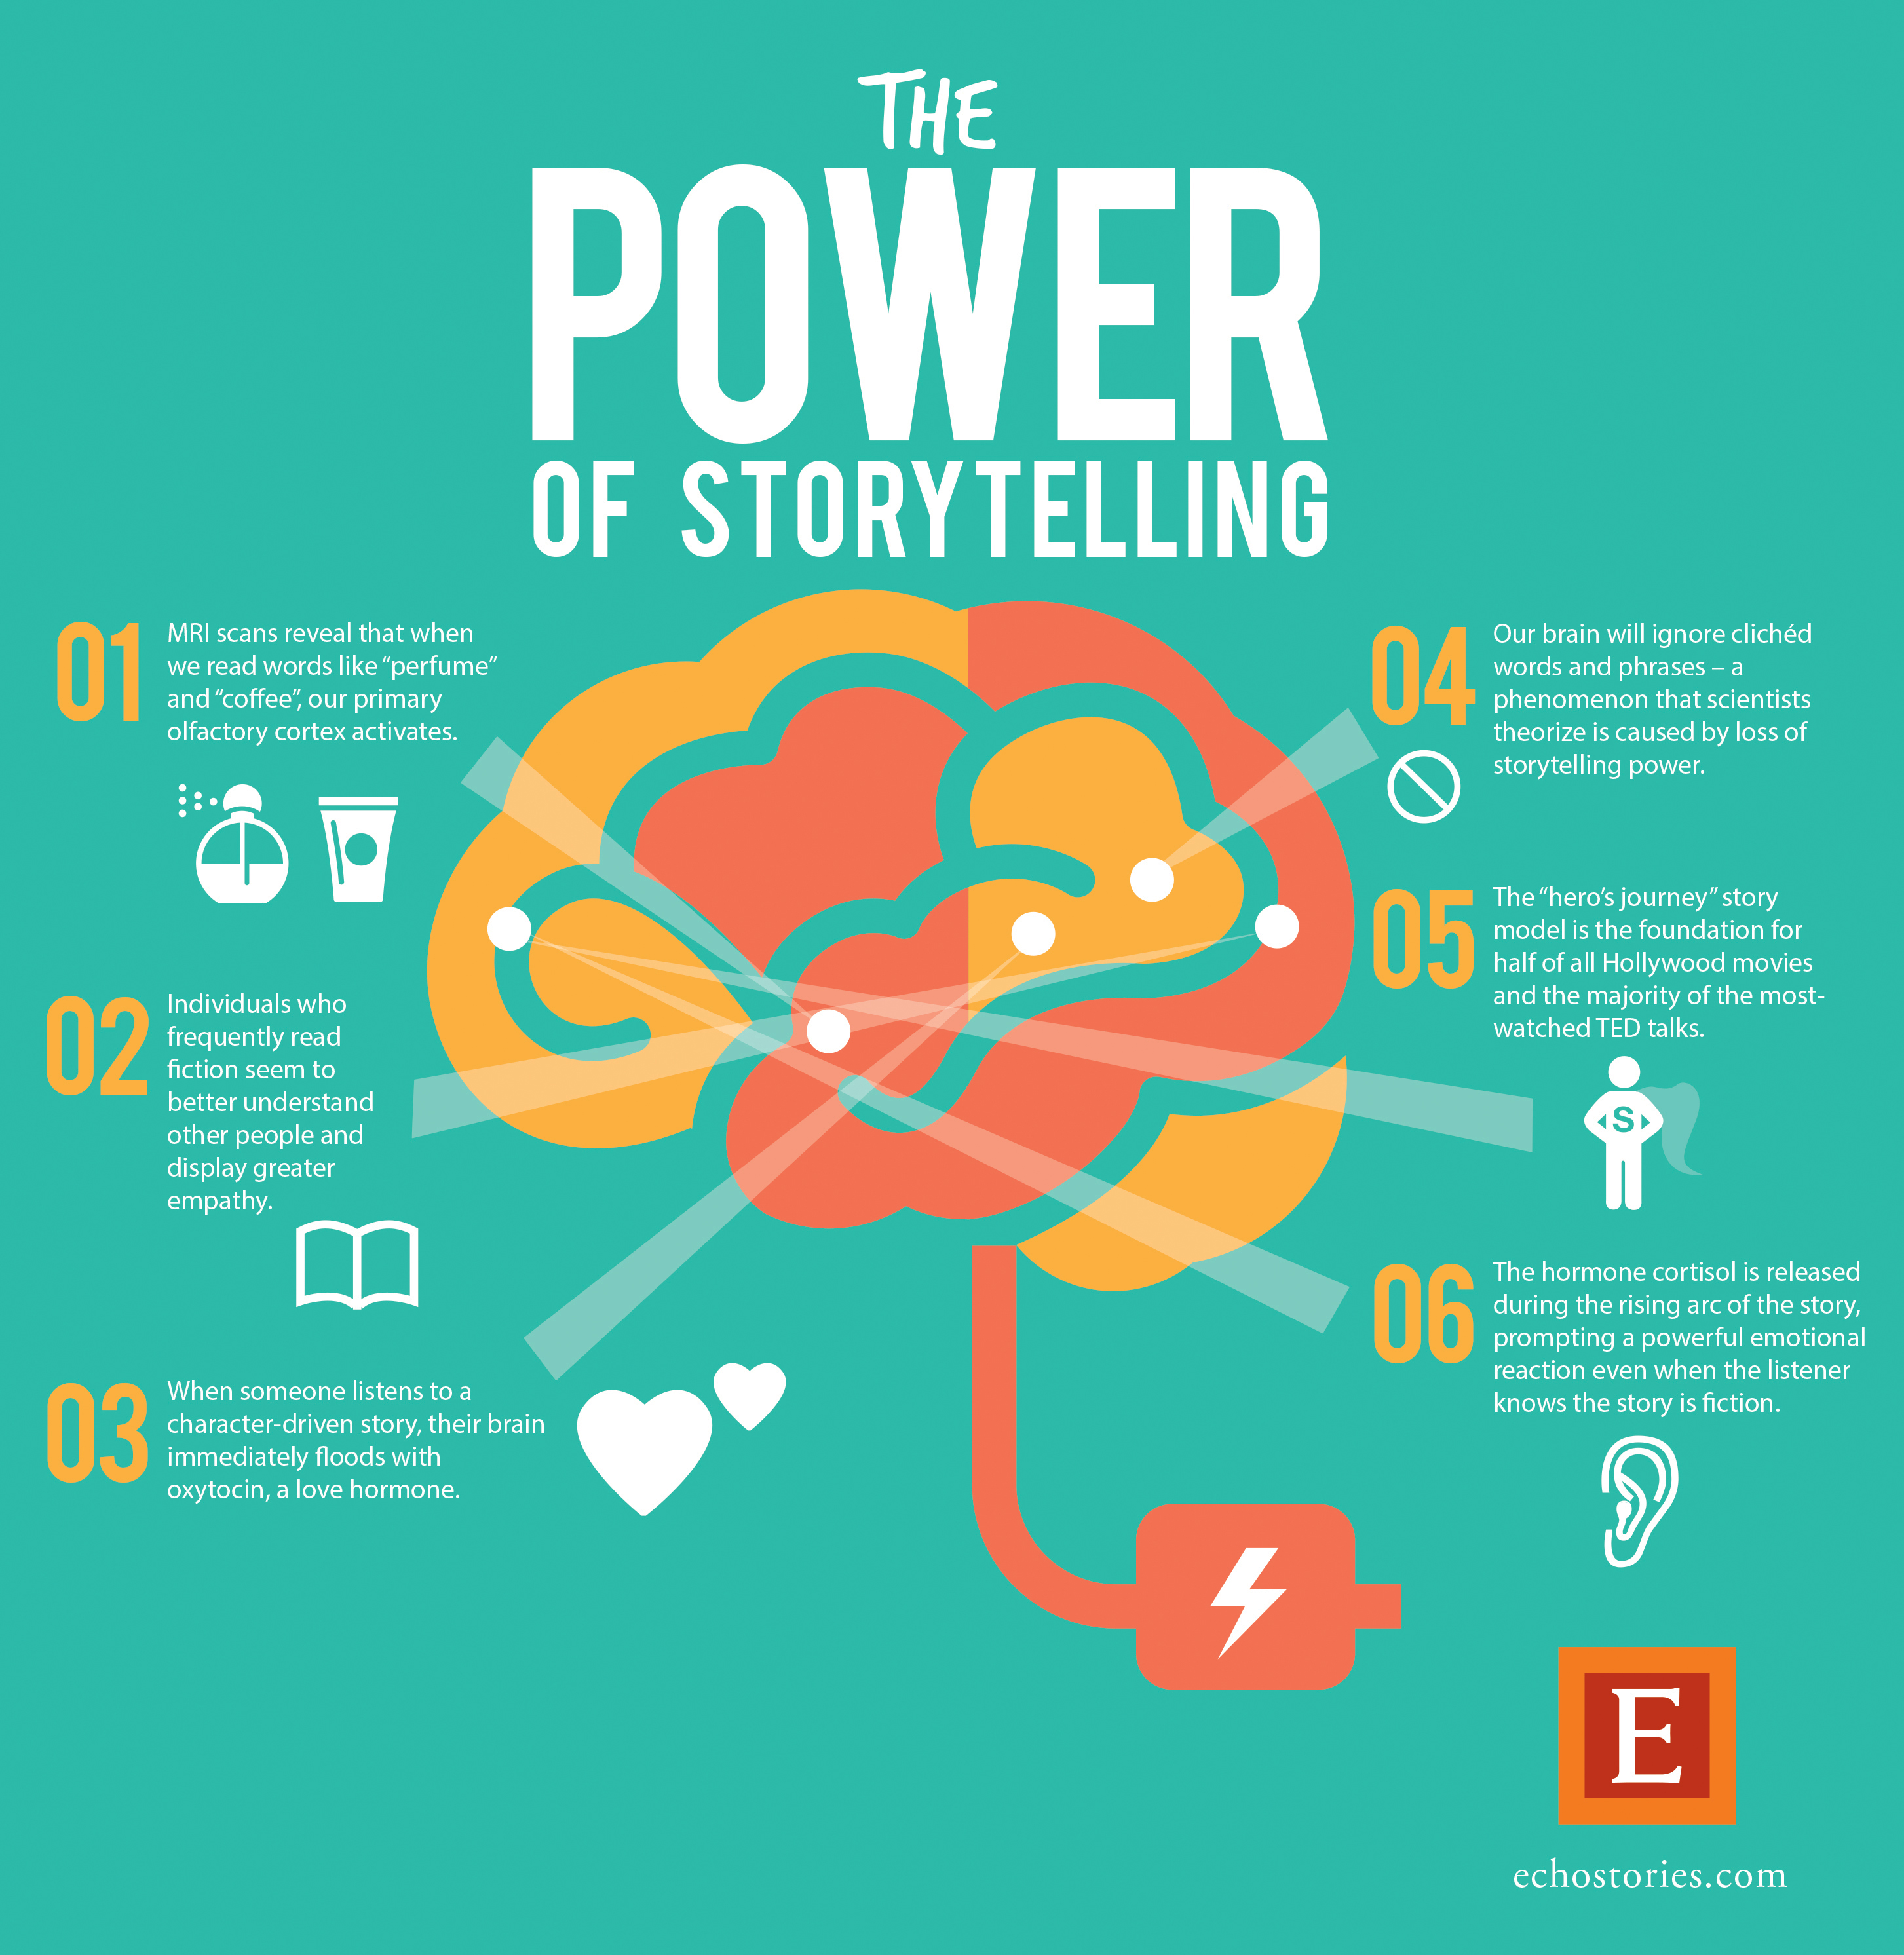 The Importance of Powerscaling in Storytelling